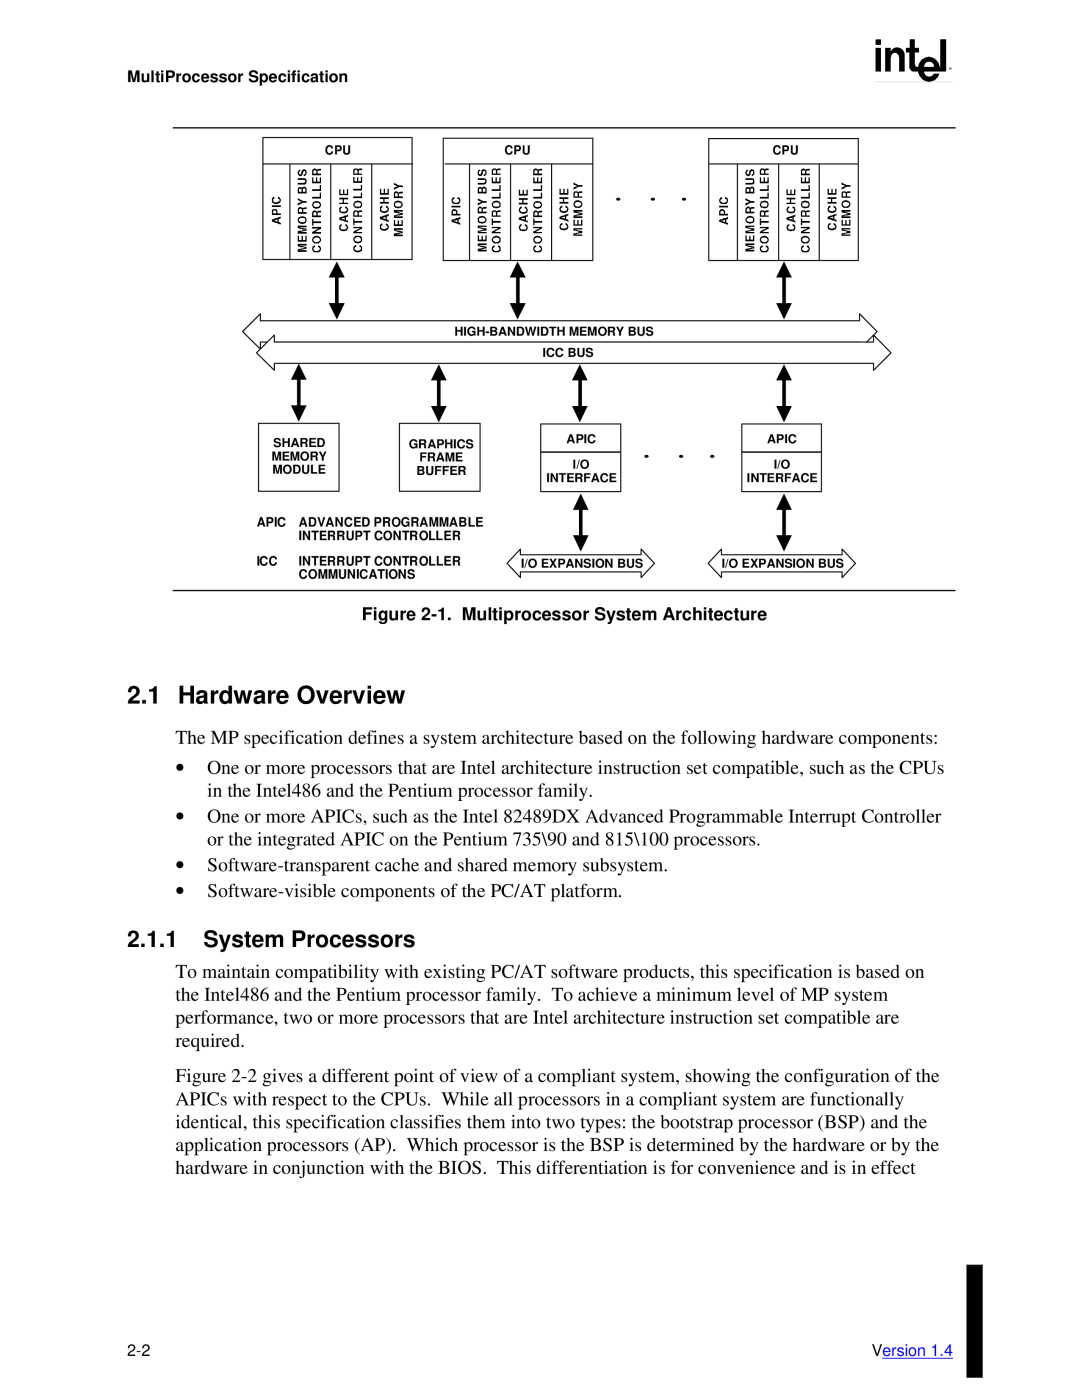 Intel MultiProcessor manual Hardware Overview, 2.1.1System Processors 